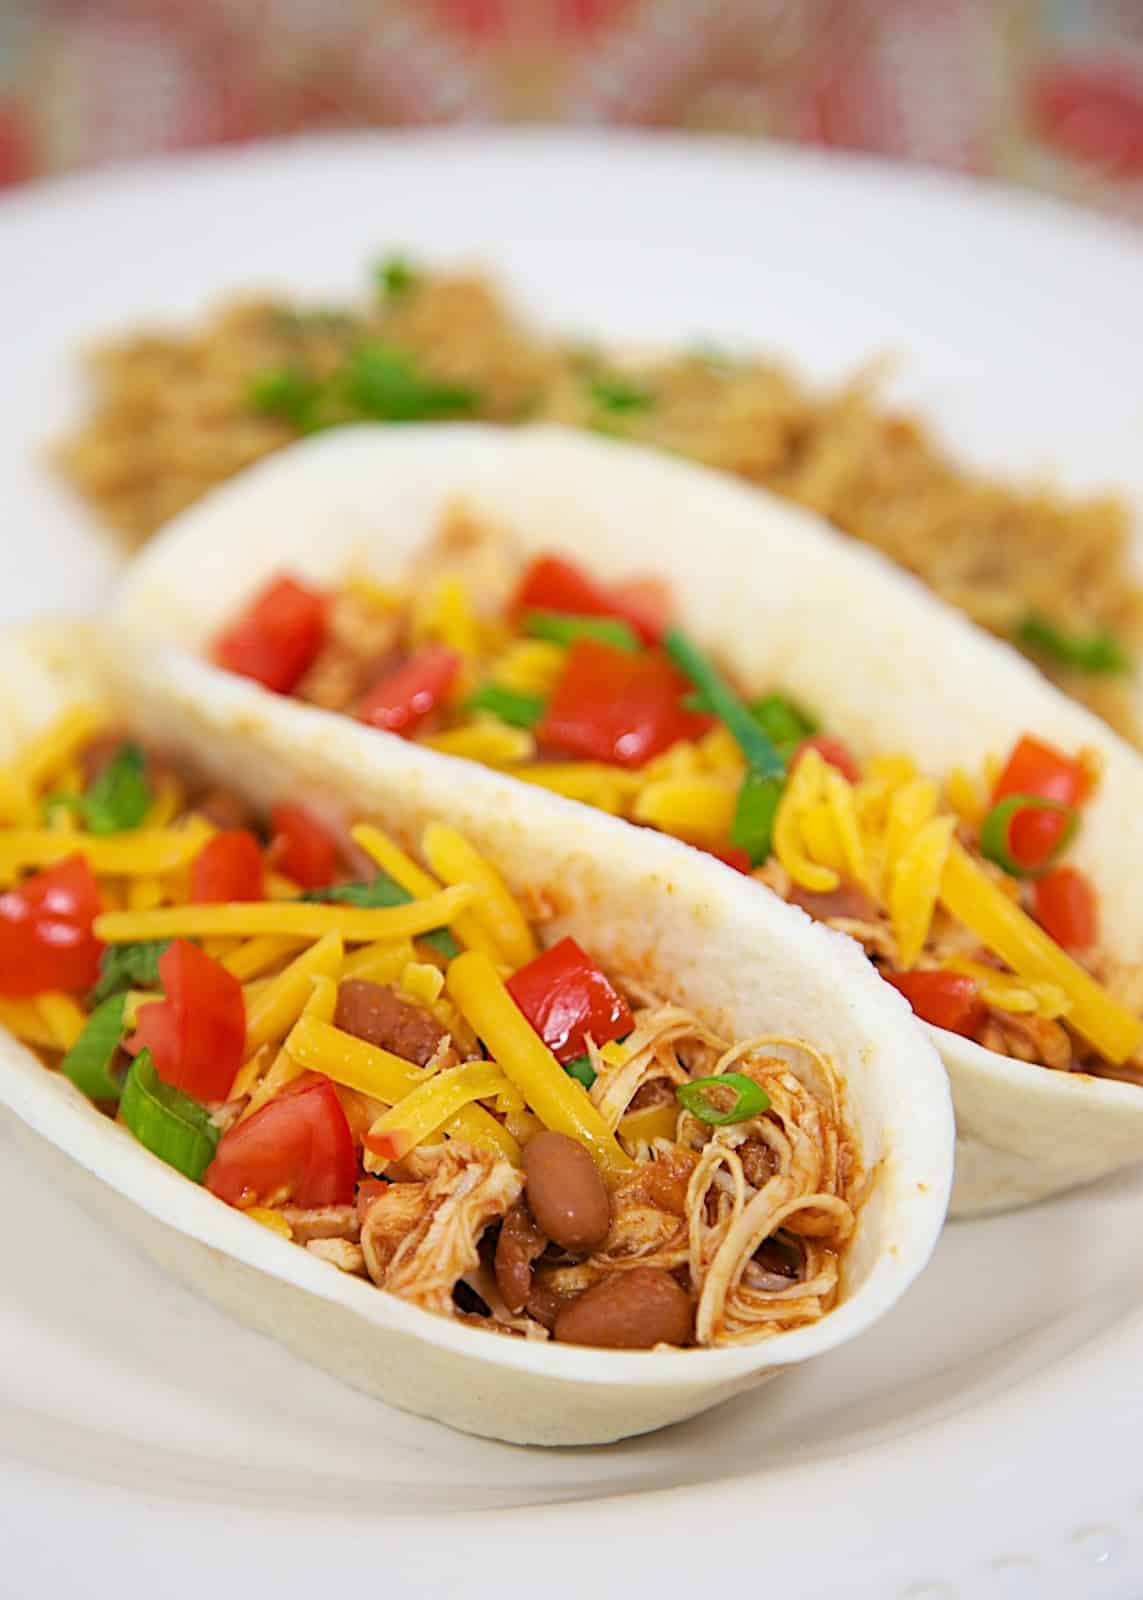 Slow Cooker Chicken Chili Tacos - only 3 ingredients! Great for tacos, topping a salad, or nachos. Makes a ton! Freeze leftovers for later. Everyone loves this easy Slow Cooker Mexican Chicken recipe!